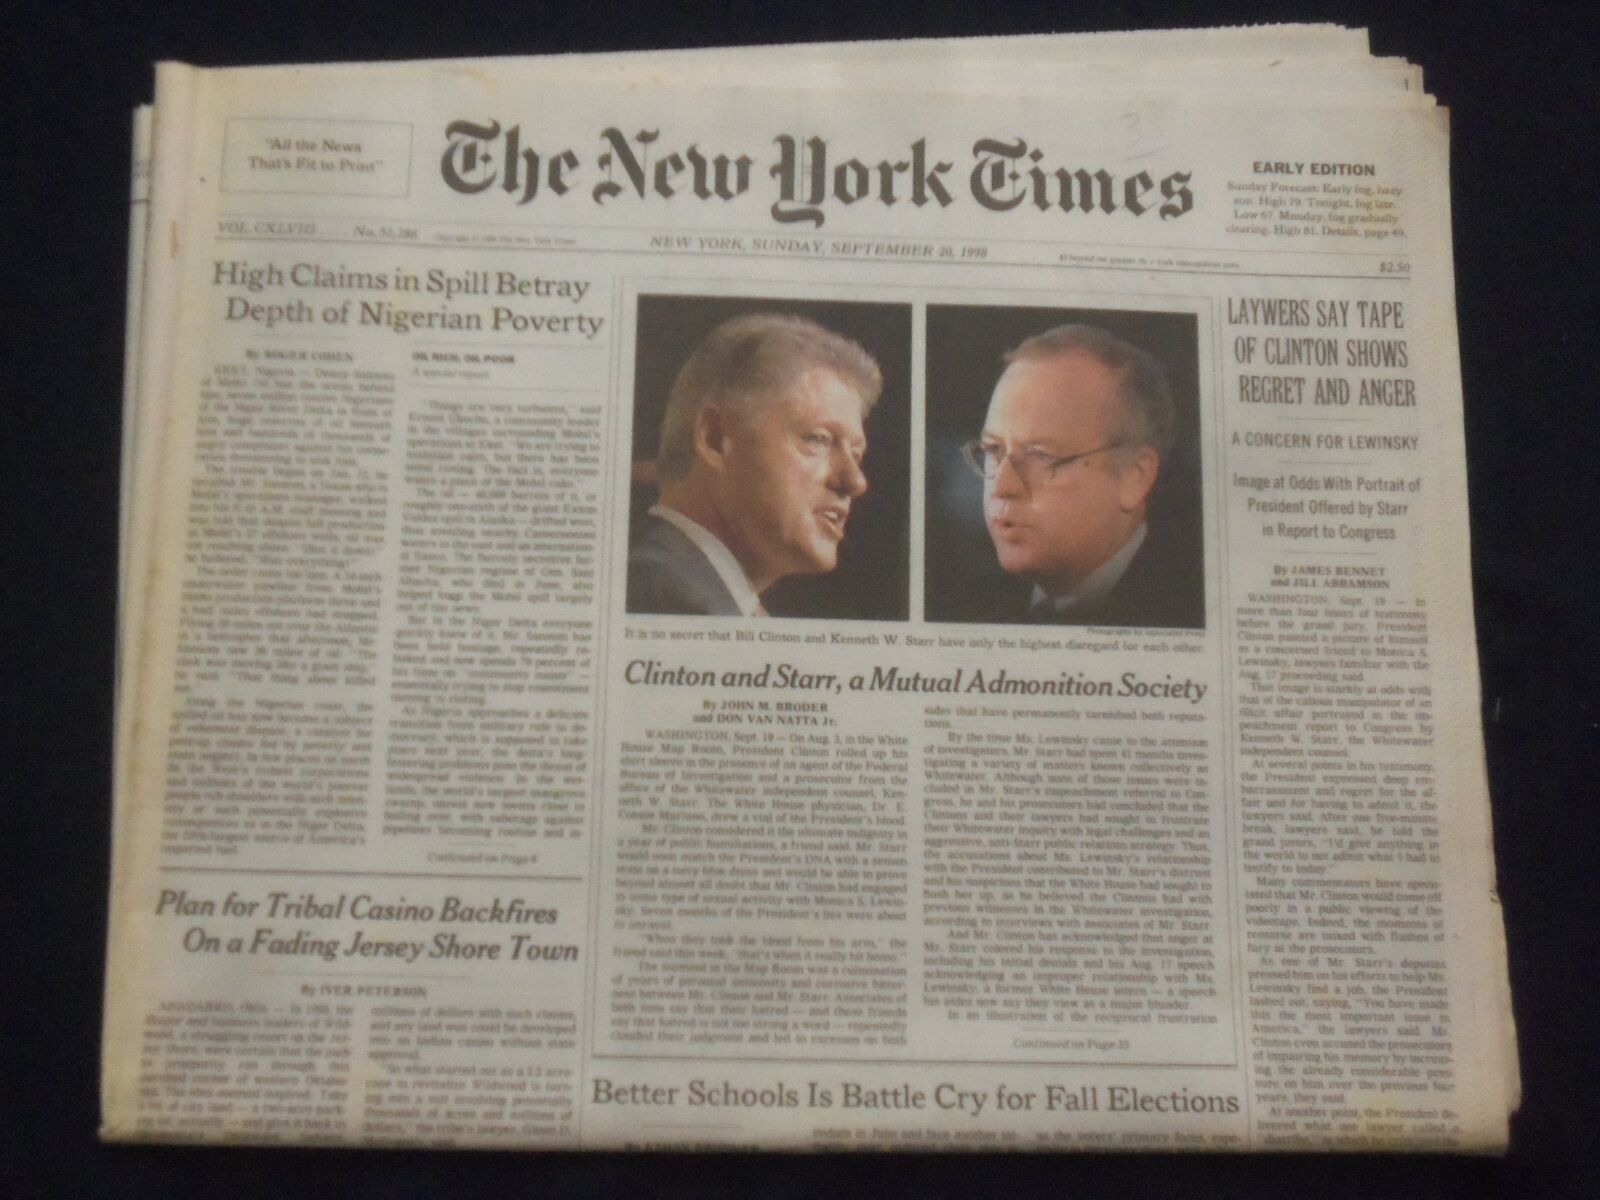 1998 SEP 20 NEW YORK TIMES NEWSPAPER -CLINTON TAPE SHOWS REGRET & ANGER- NP 7130